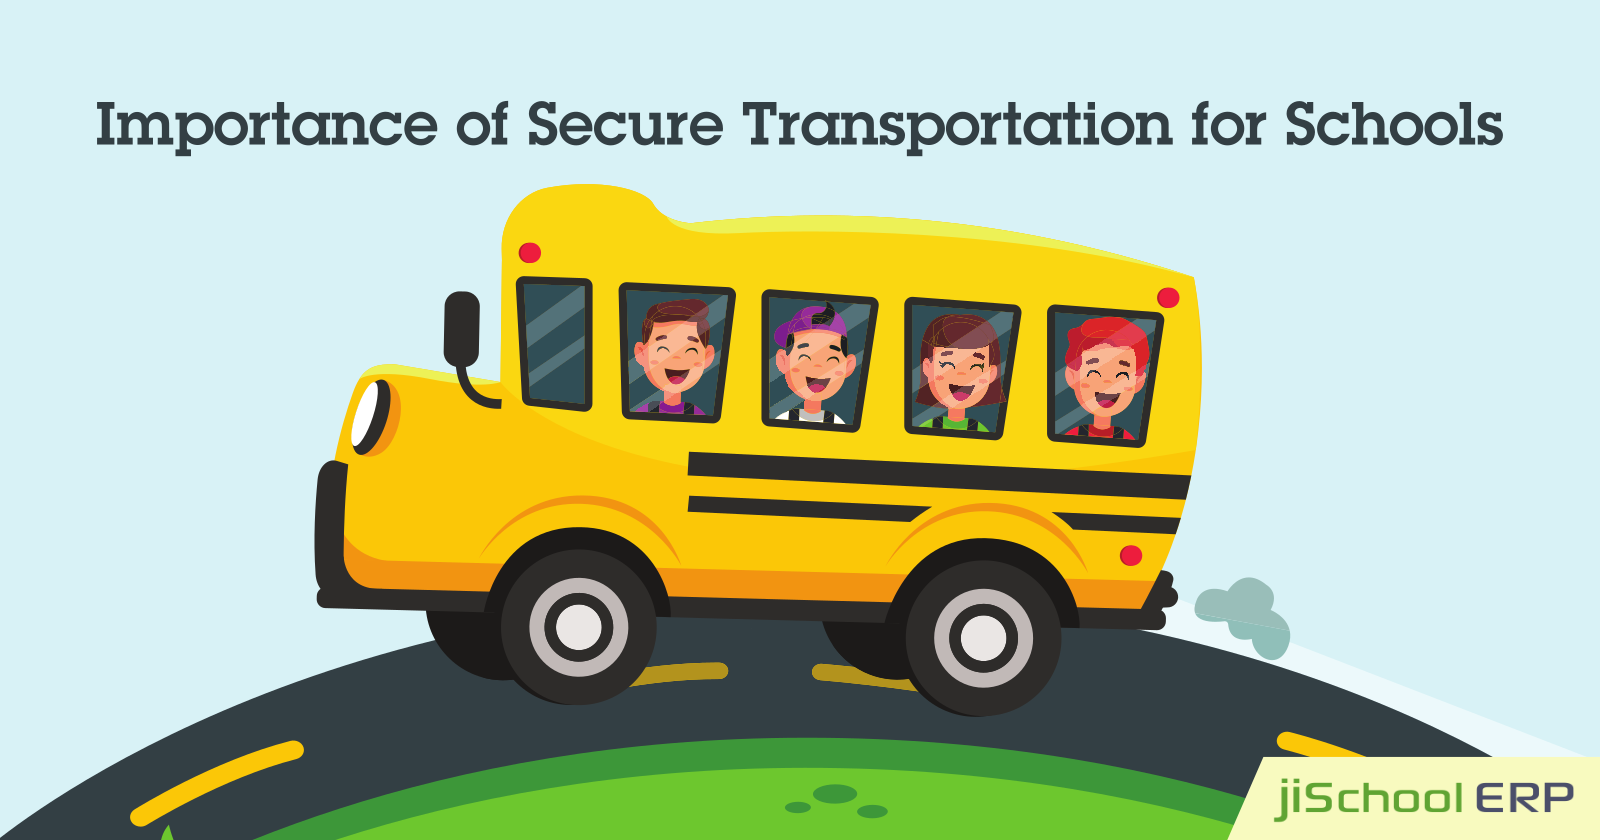 How School ERP Offers a Secure Transportation System